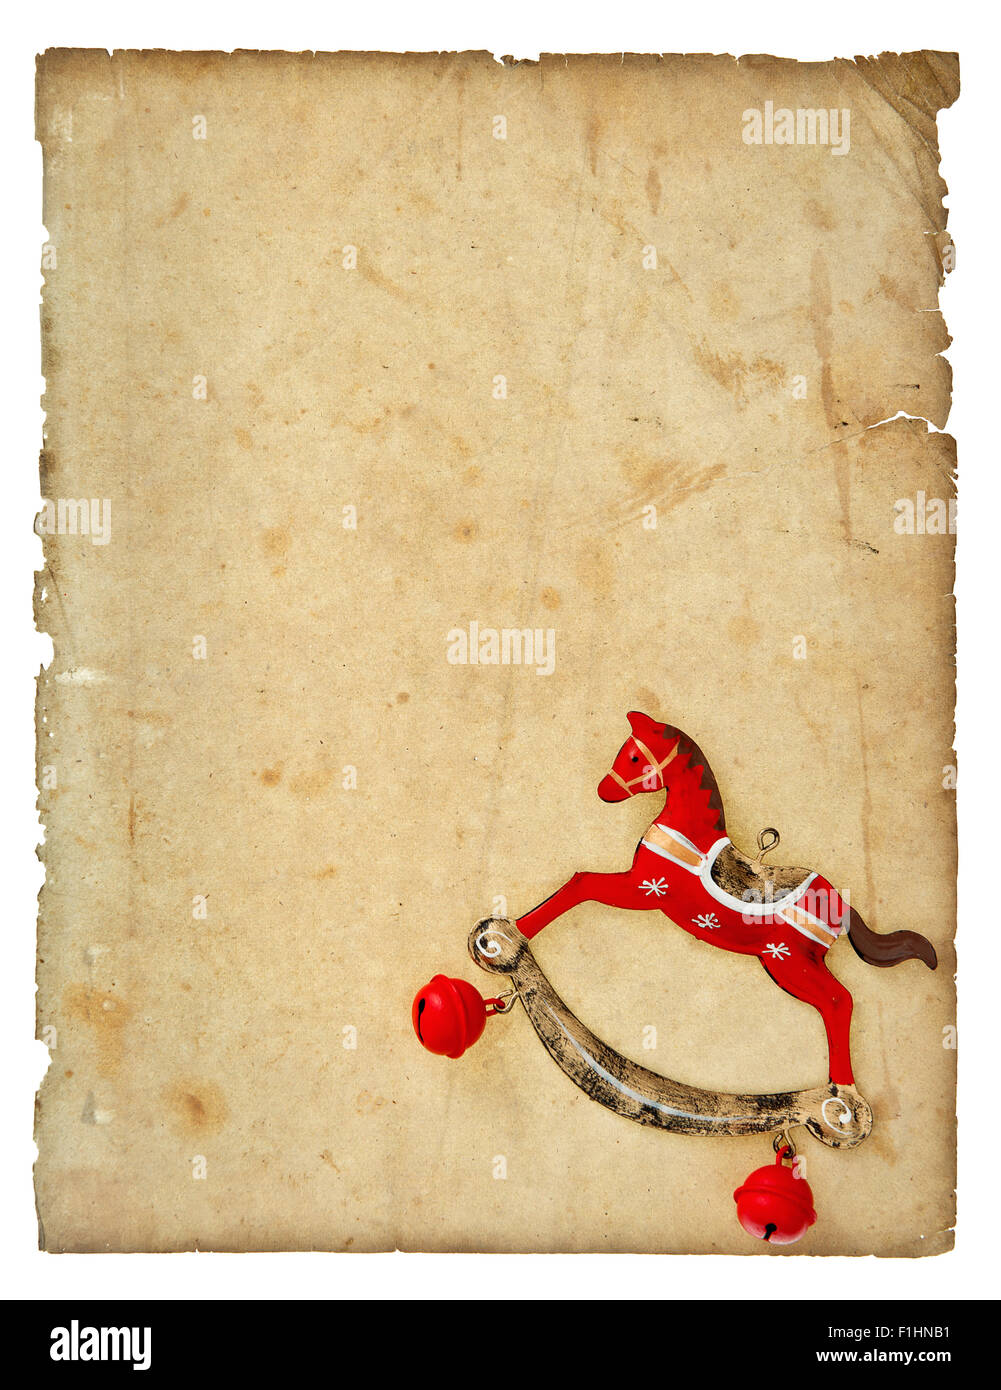 Christmas decoration vintage style rocking horse toy with aged paper page isolated on white background Stock Photo